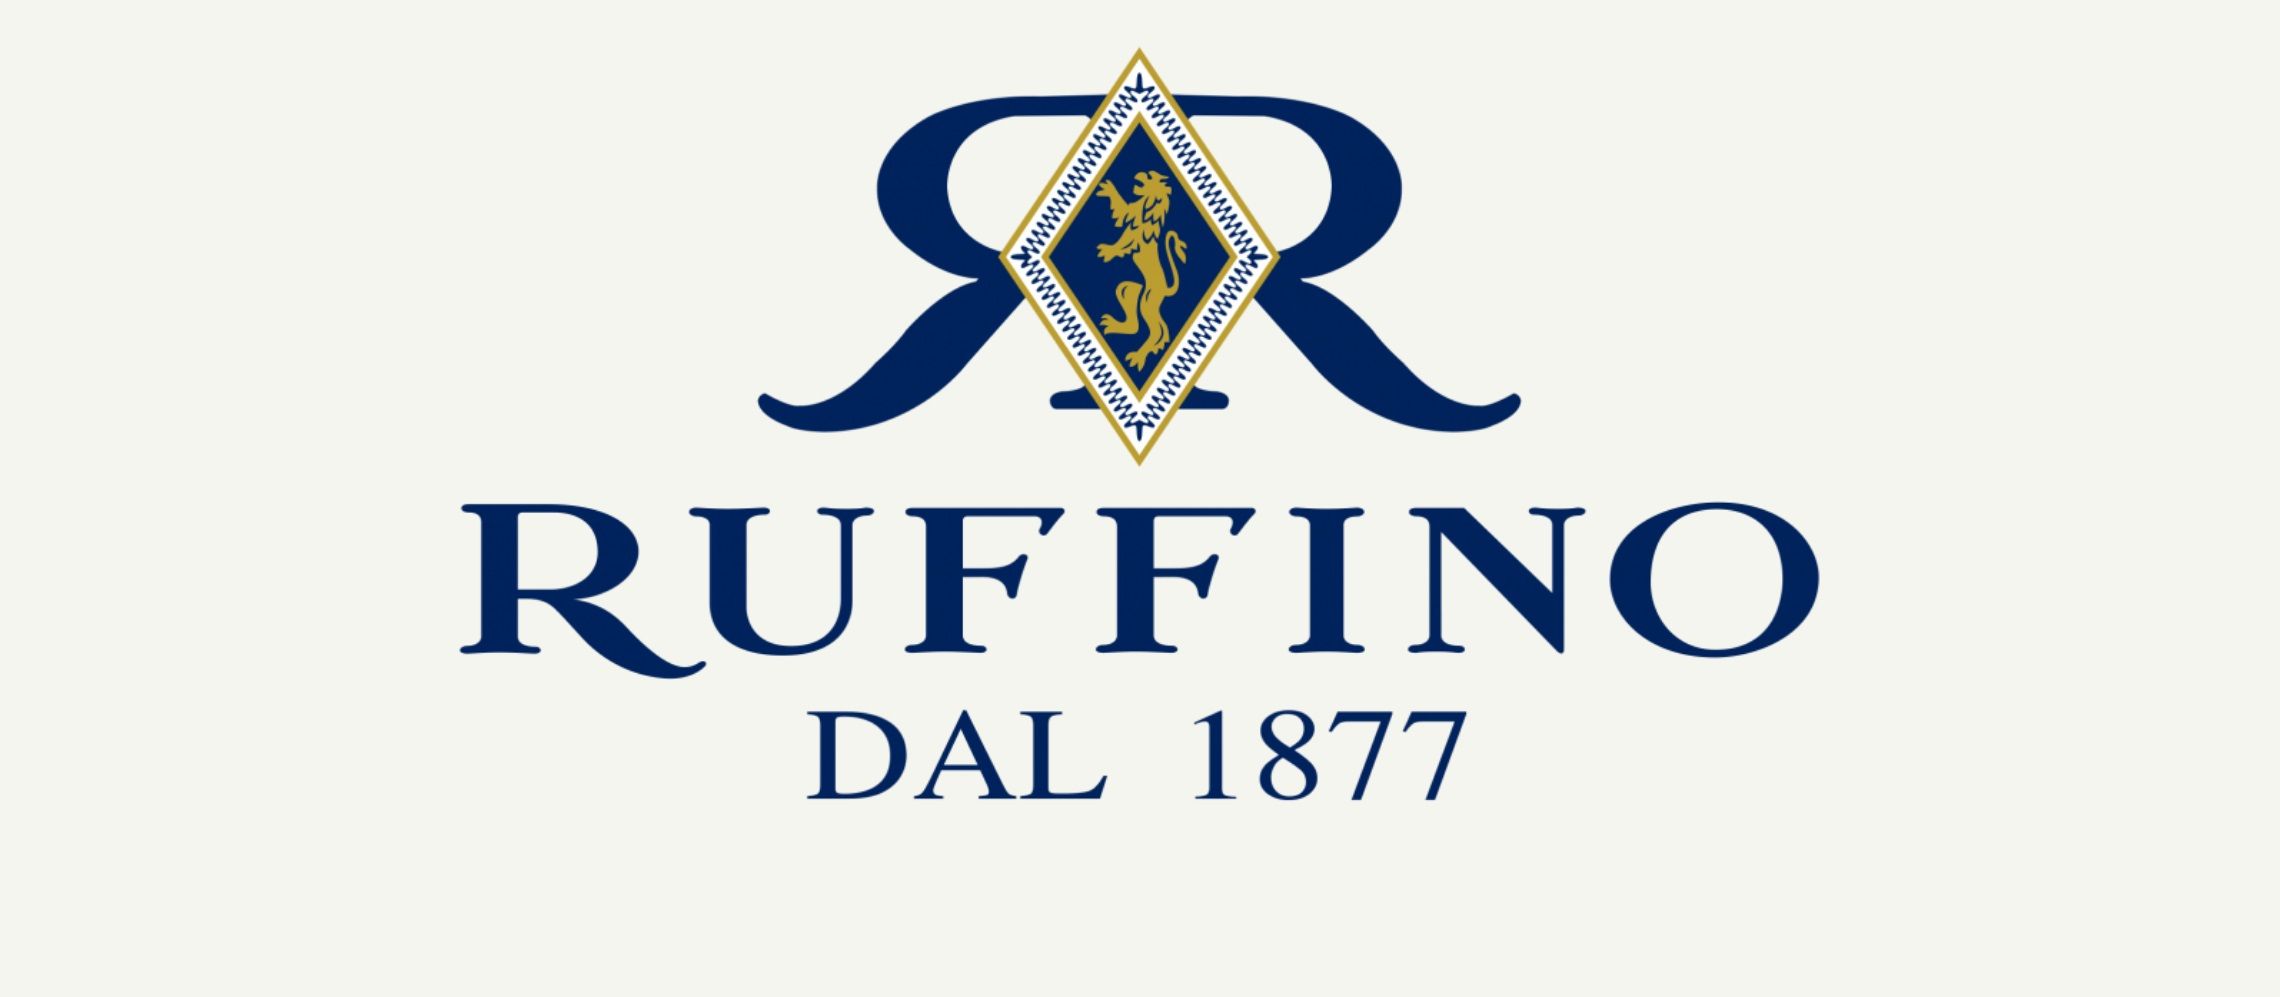 Photo for: Ruffino joins Wine in Moderation as Ambassador Company